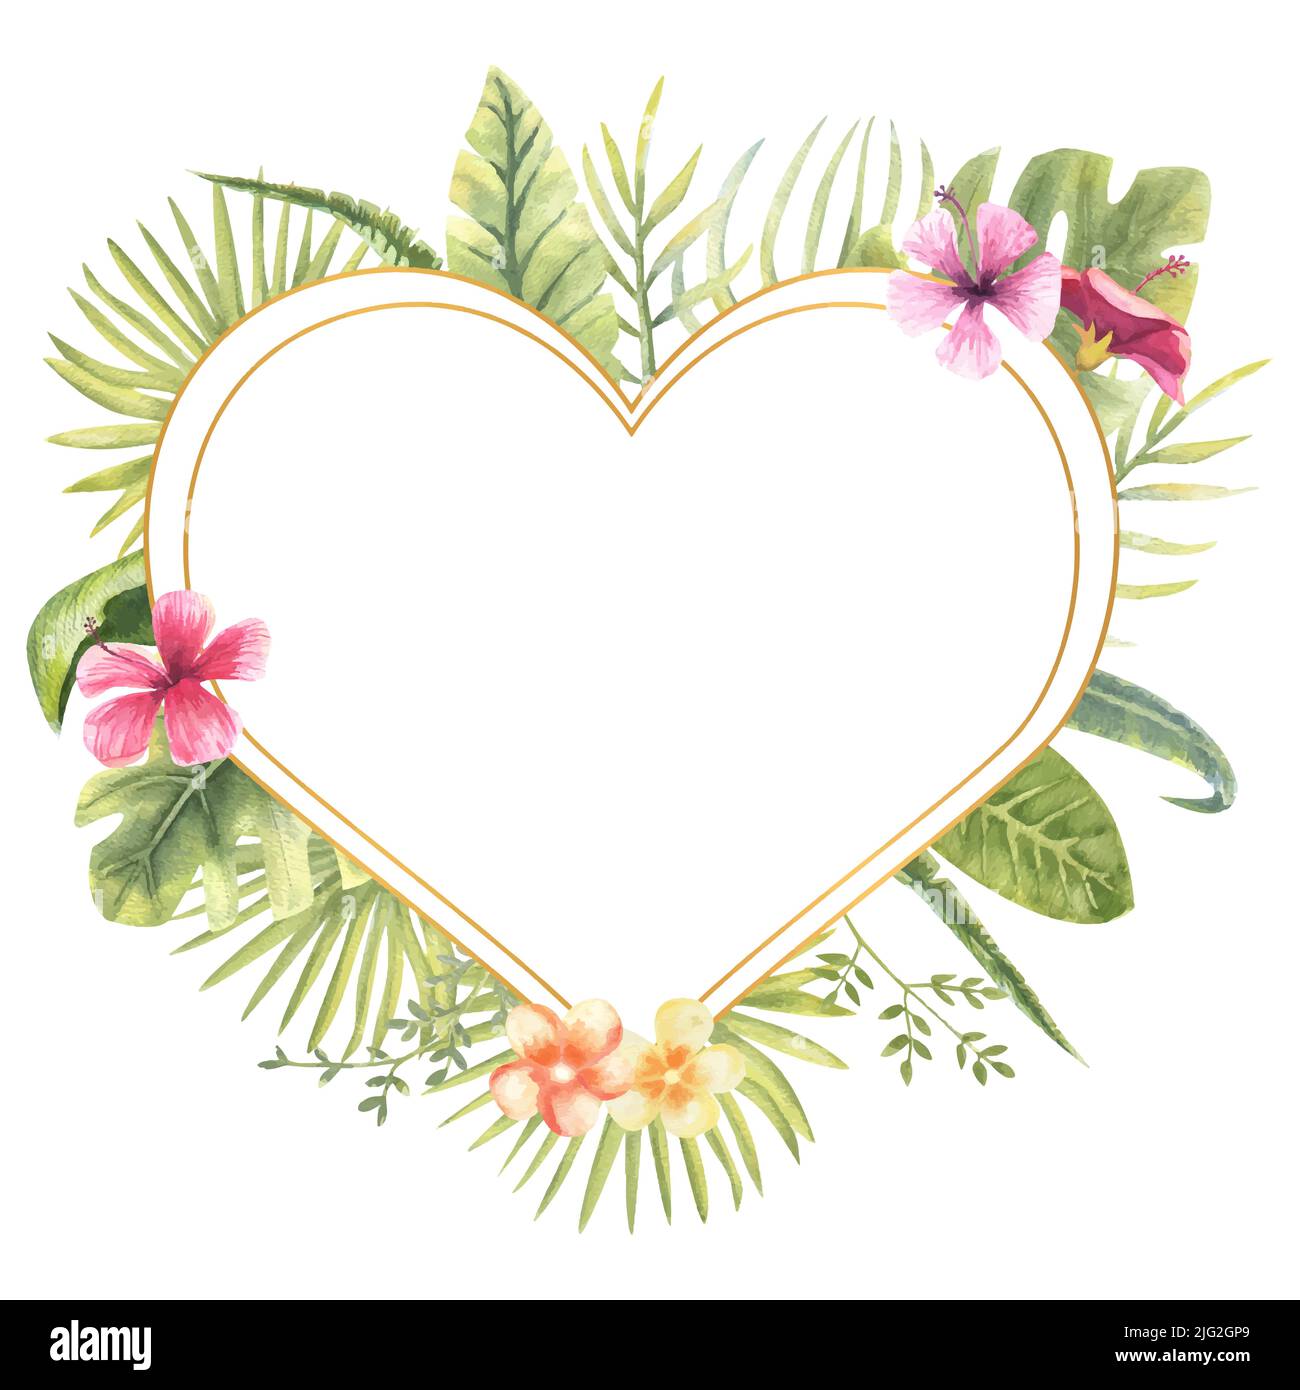 Vector illustration of a heart-shaped frame with tropical plants. Monster, banana leaves, hibiscus, etc. Floral watercolor. For the design of greeting Stock Vector